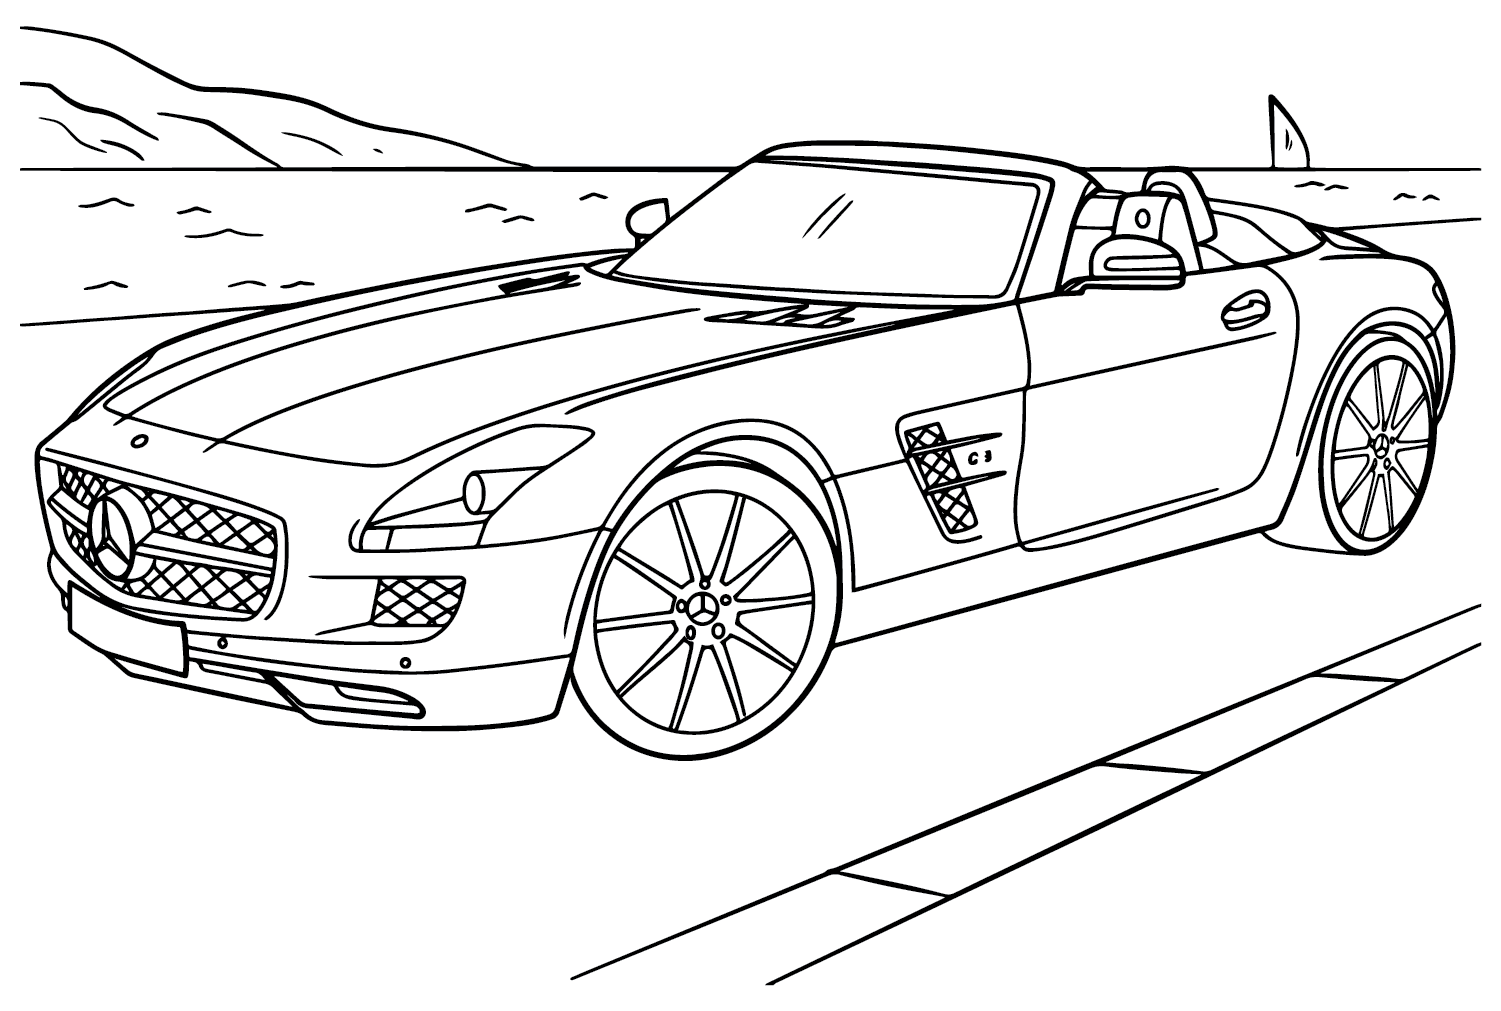 Mercedes-Benz SLS AMG Coloring Page from Mercedes-Benz